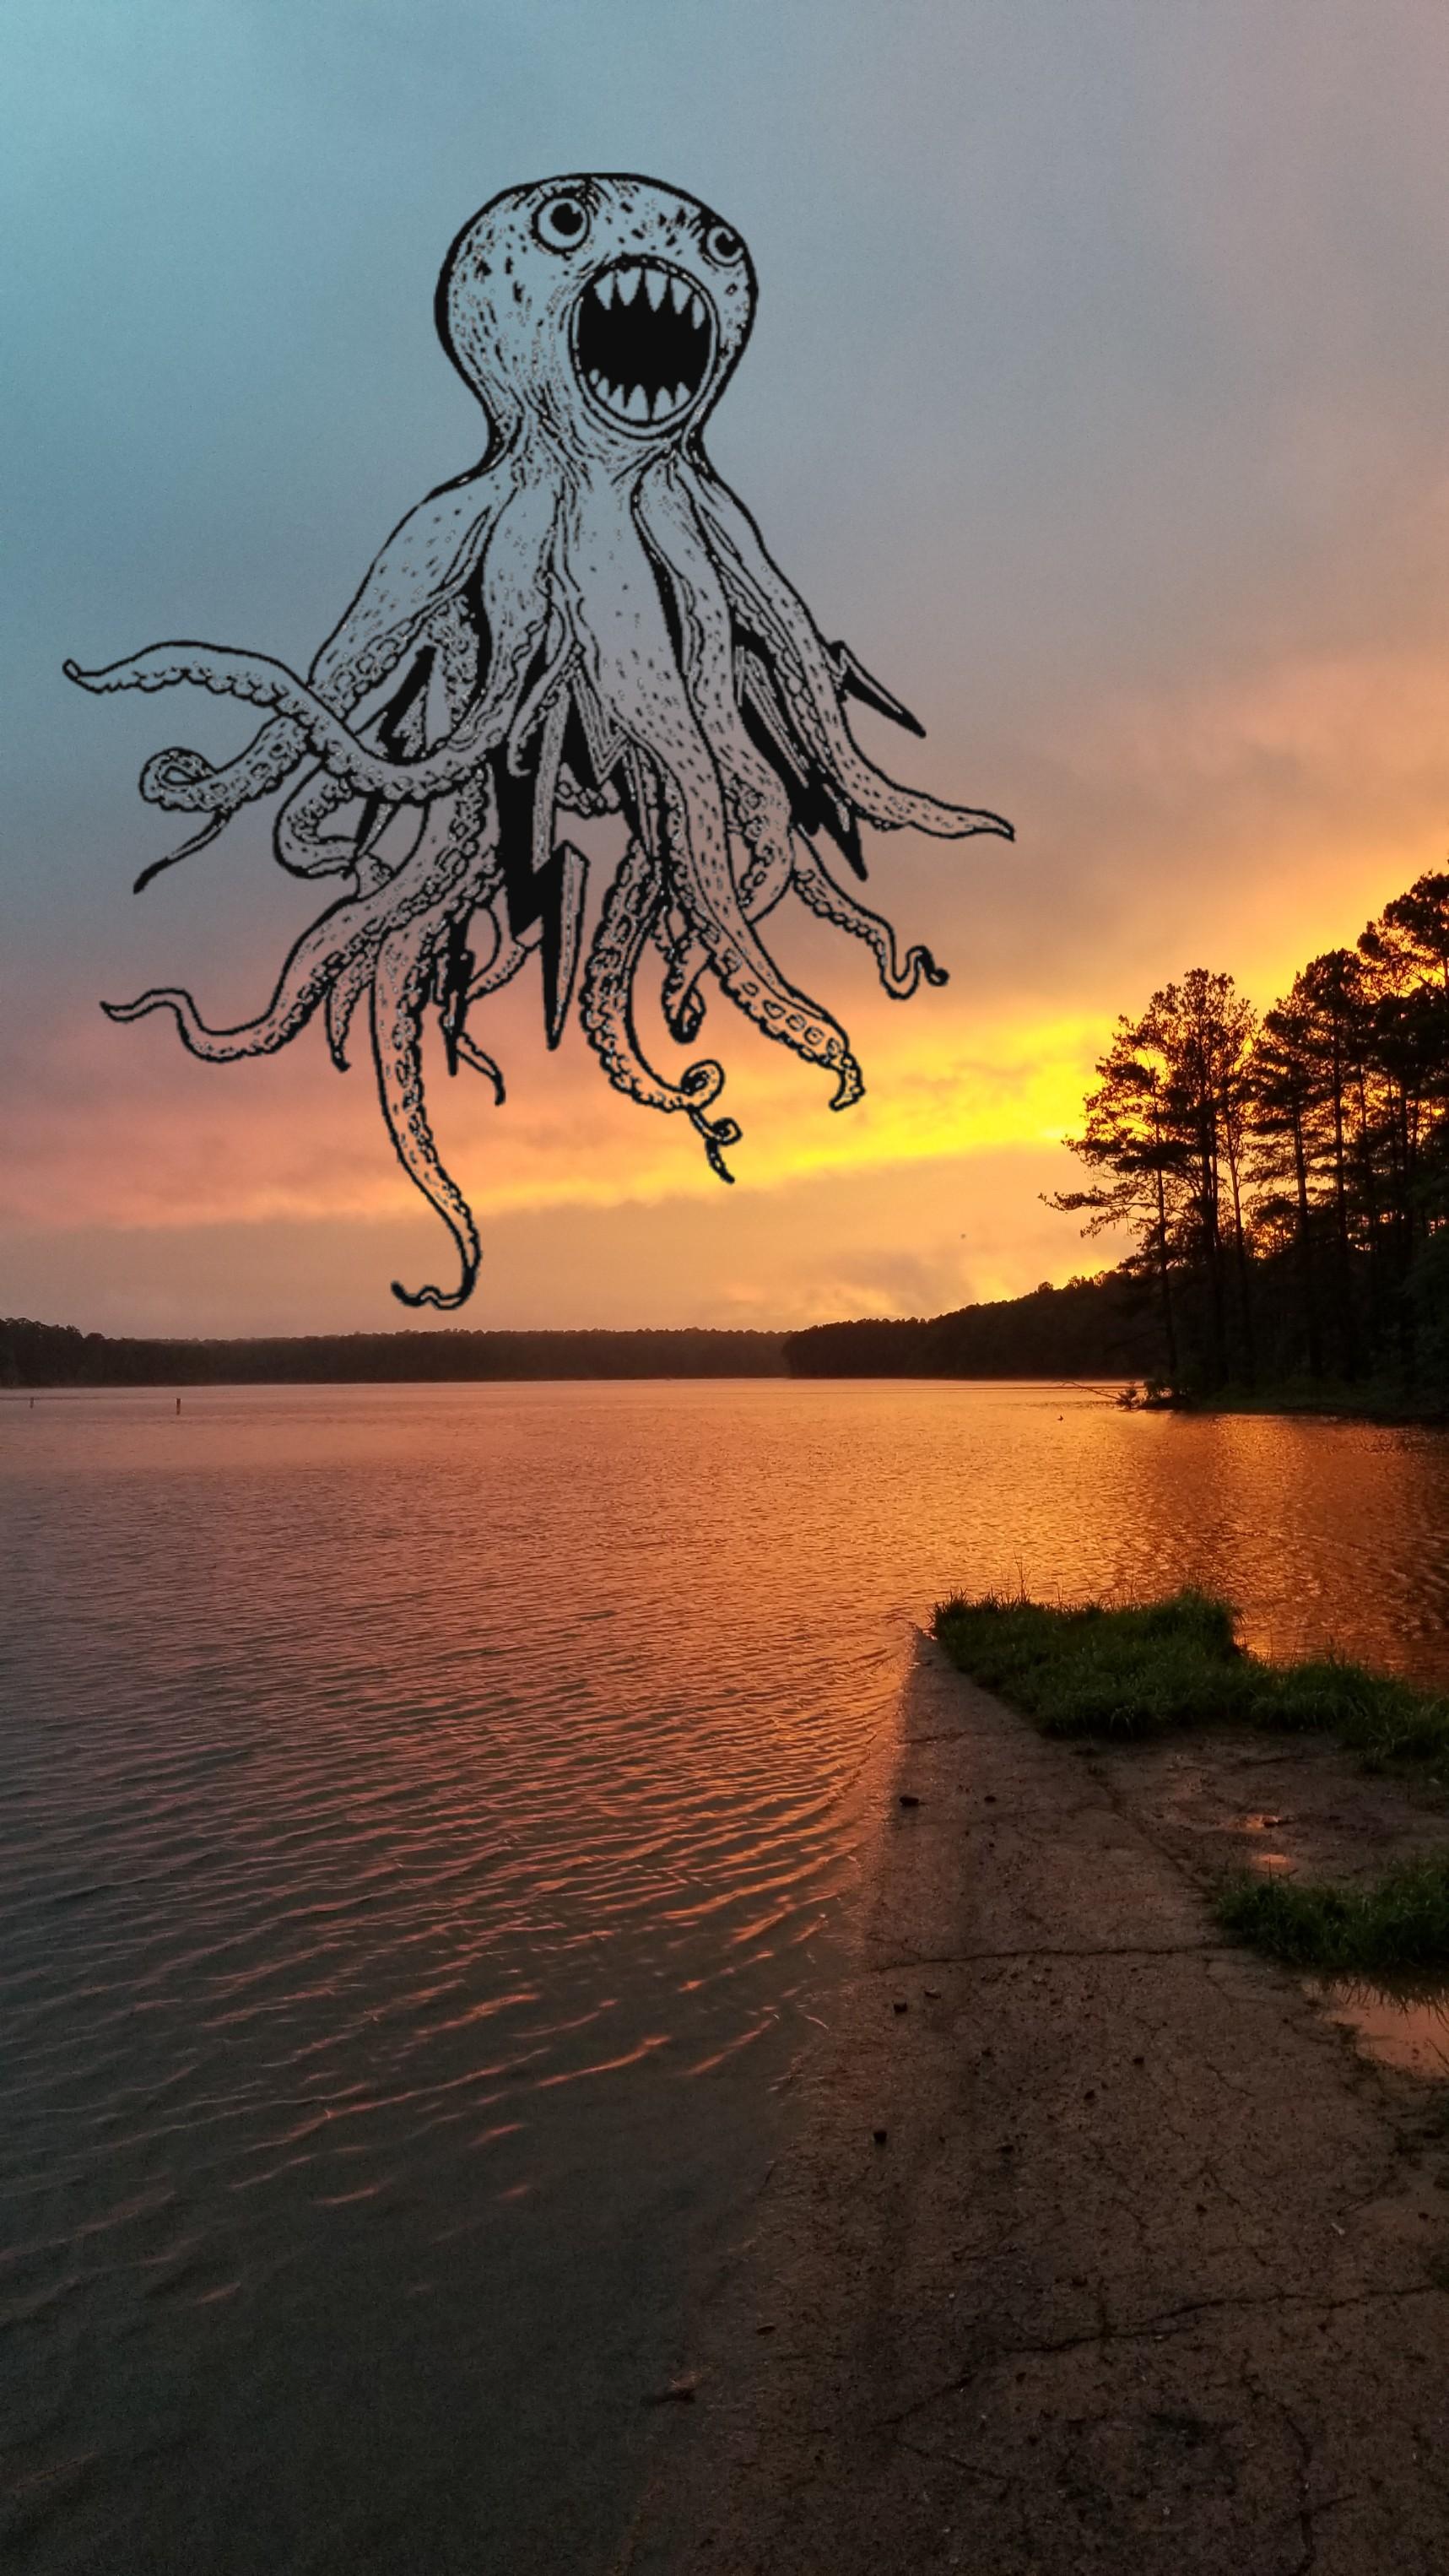 A Dirty Heads wallpaper I made